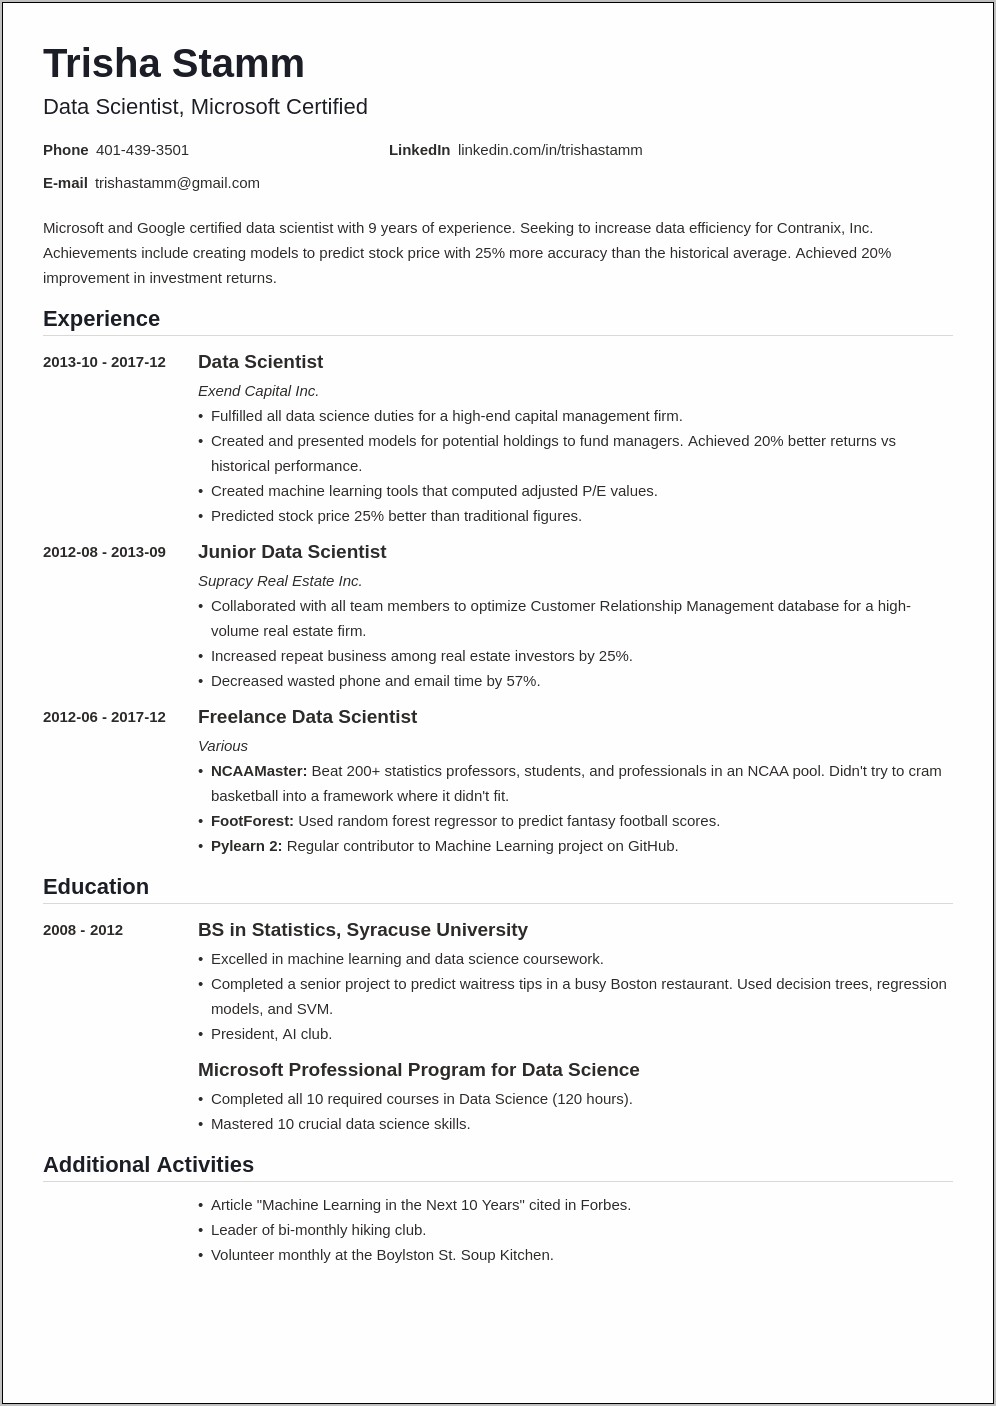 Sample Resume Career Objective Statement Forpolitical Science